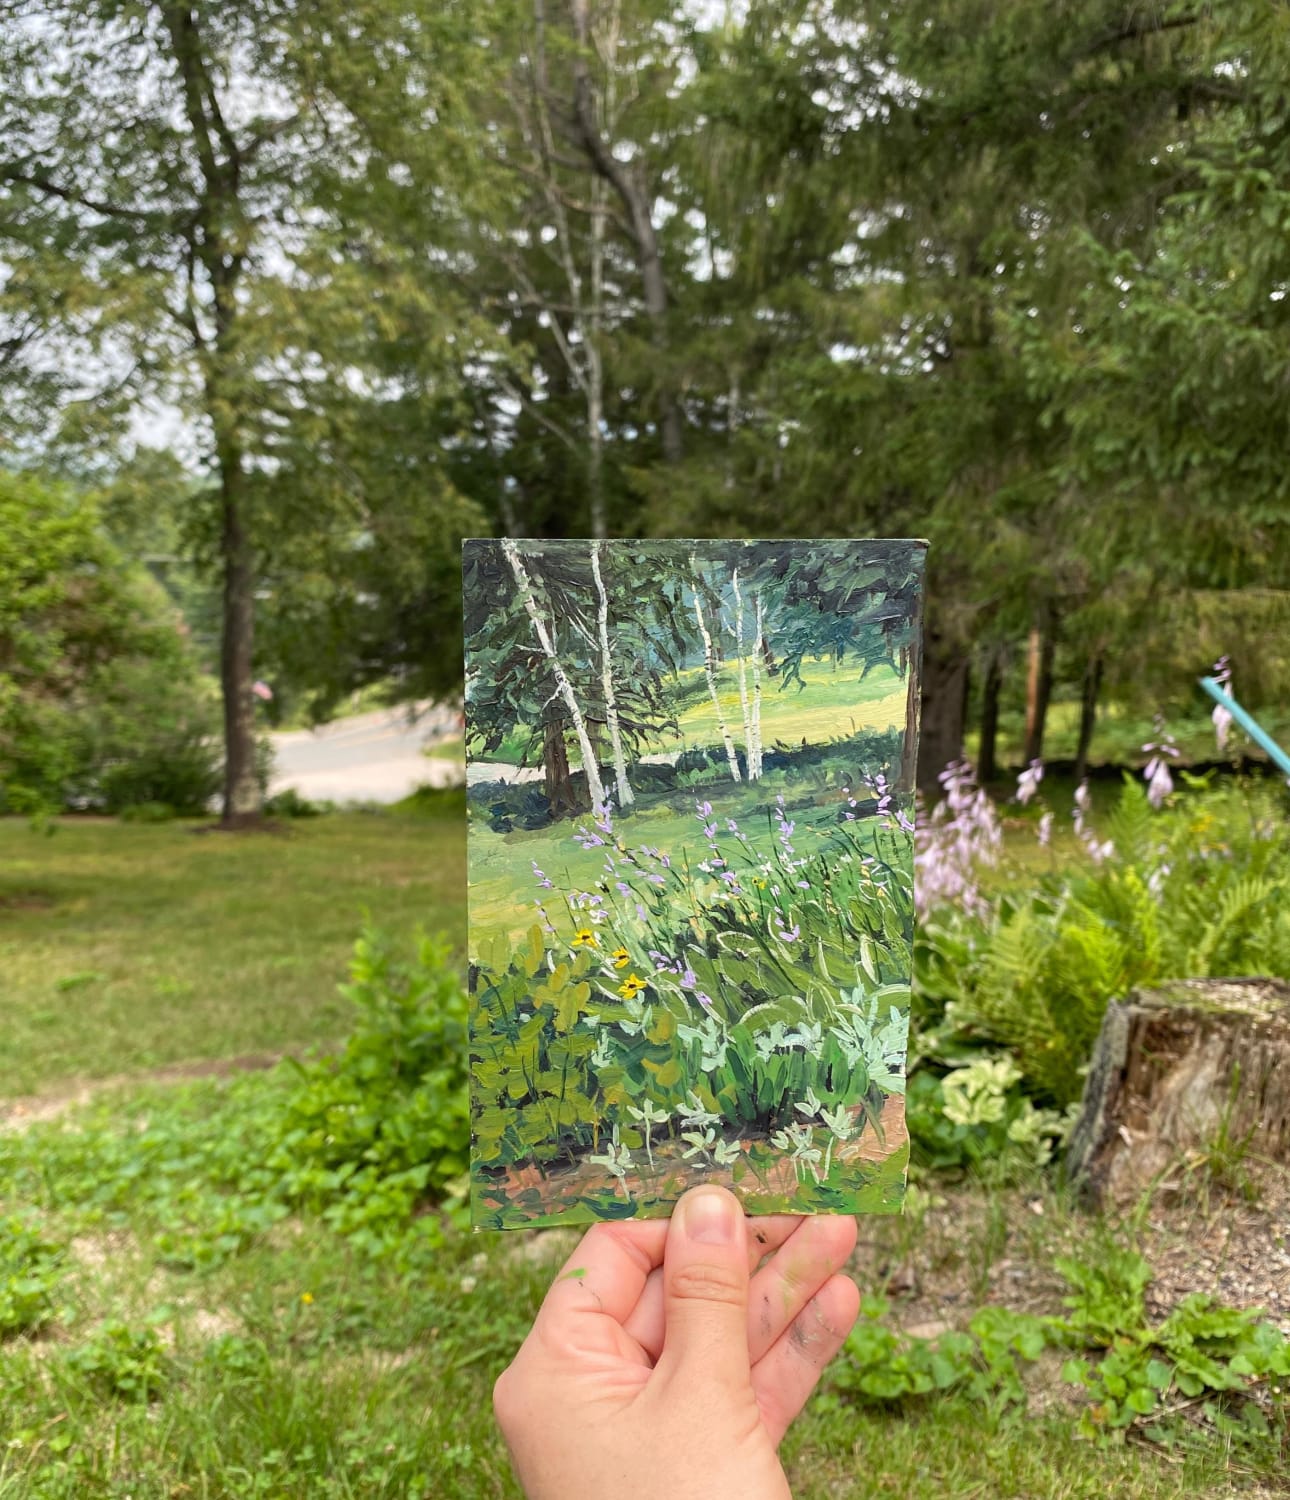 Quick oil sketch of the gardens at the historic inn we’re staying at!